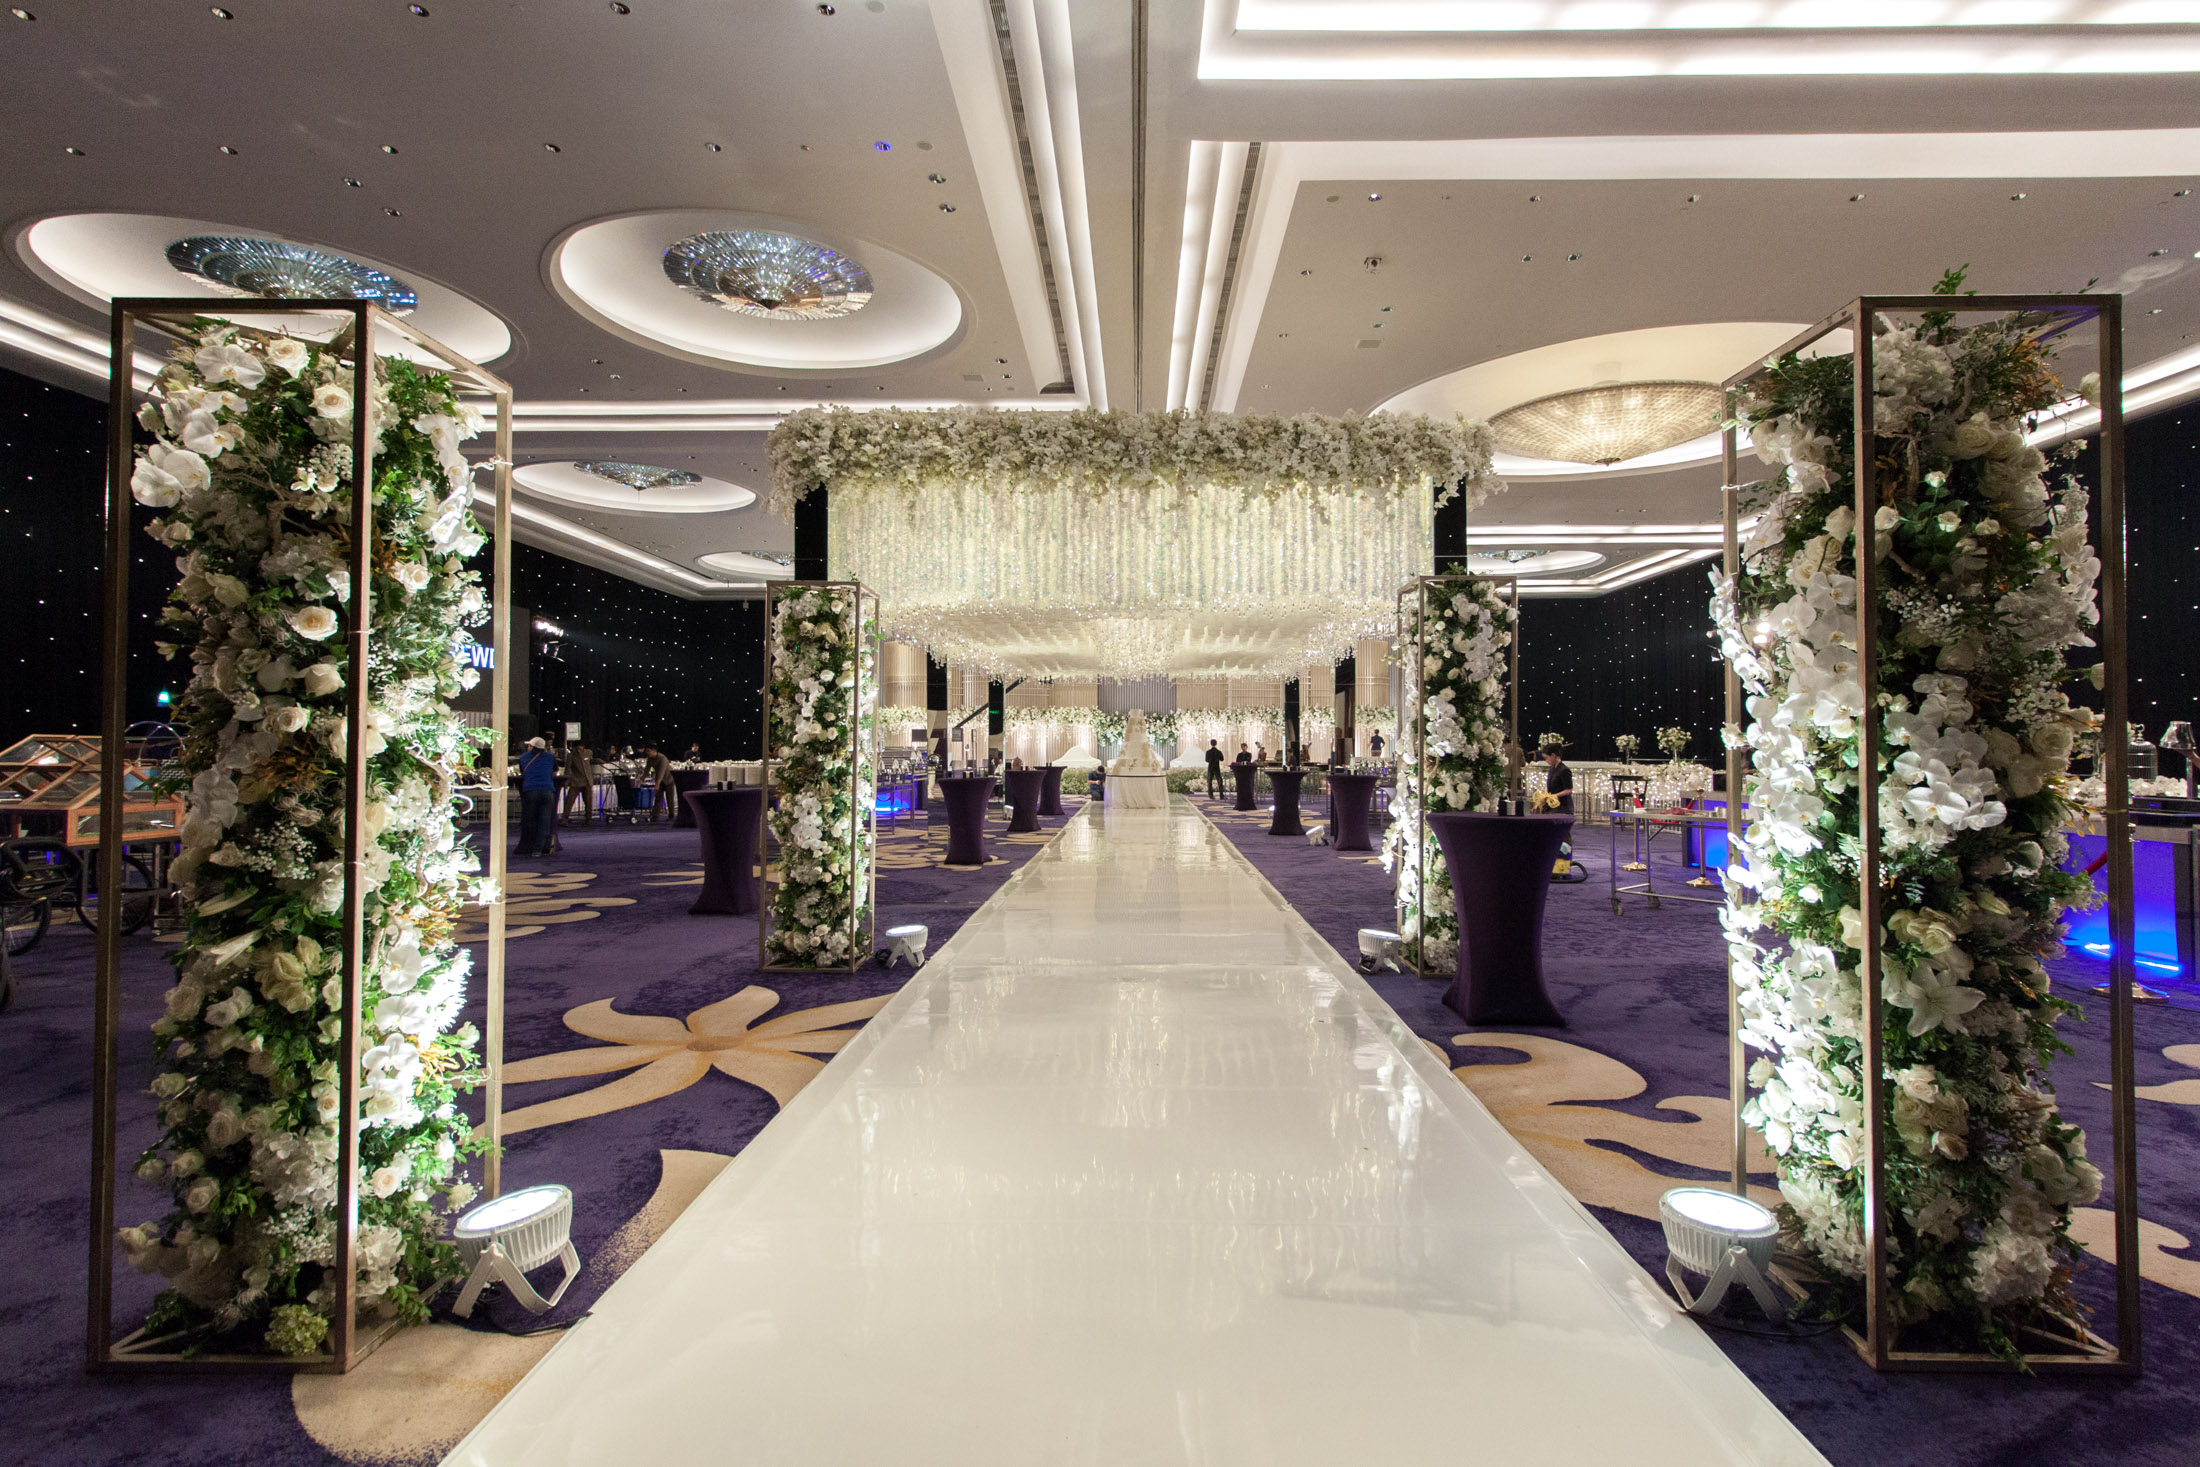 Raymond and Felicia's wedding | Venue at Raffles Hotel Jakarta | Decoration by Lotus Design | Lighting by Lightworks